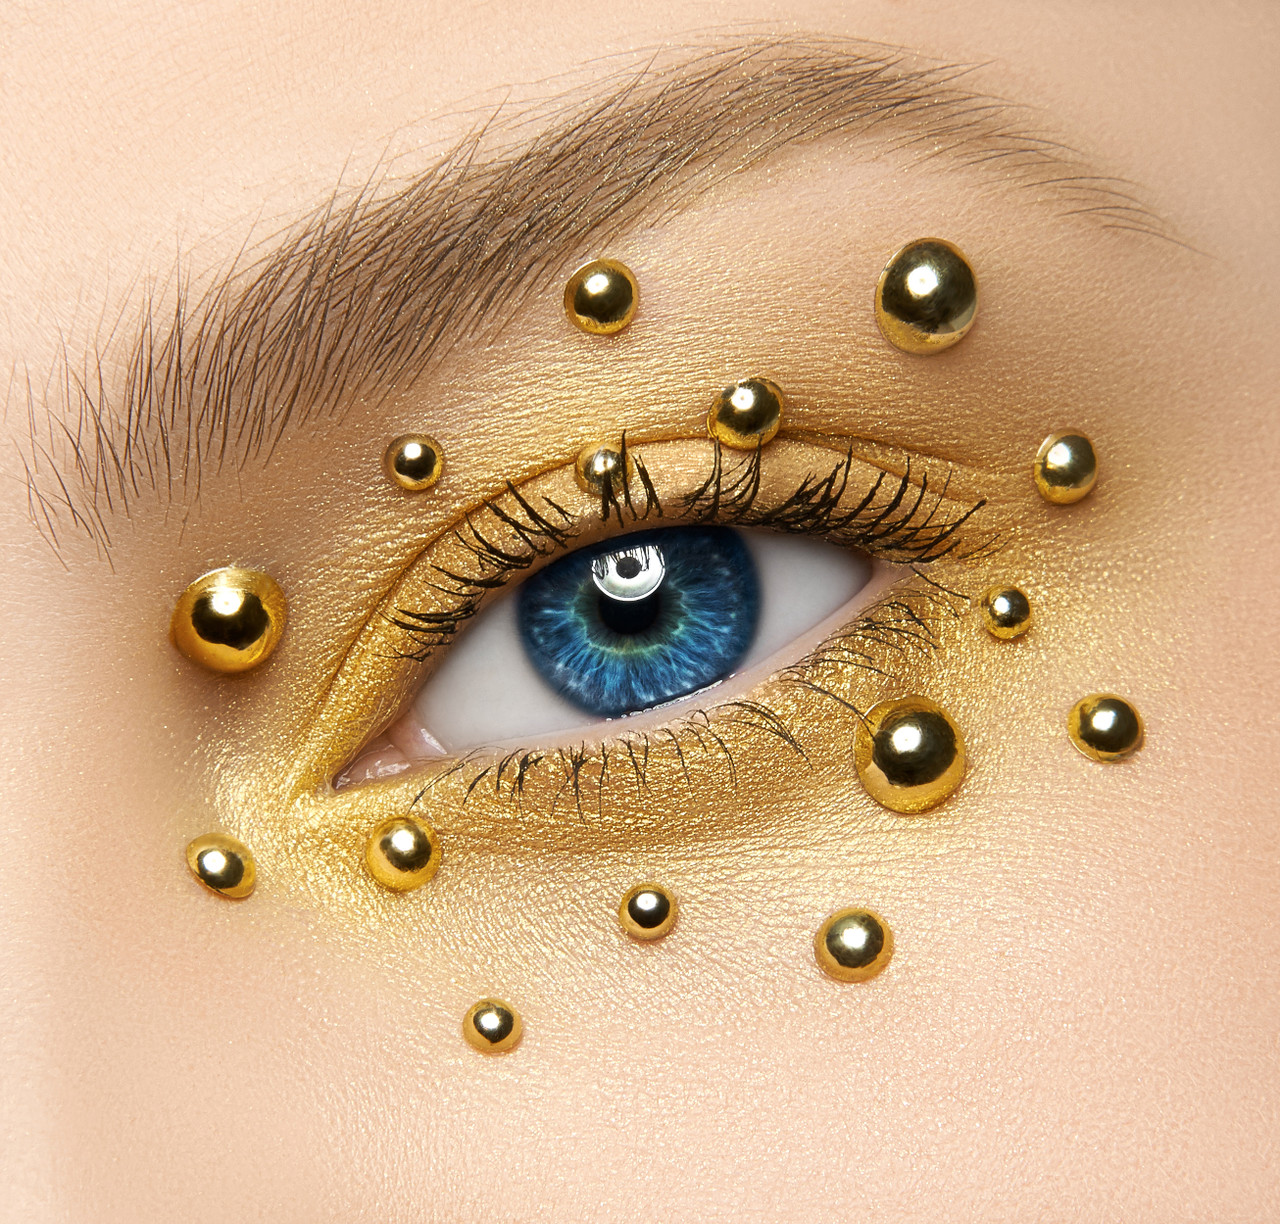 J-LASH - Jewel For Eyes Gold Clear 12 Unidades